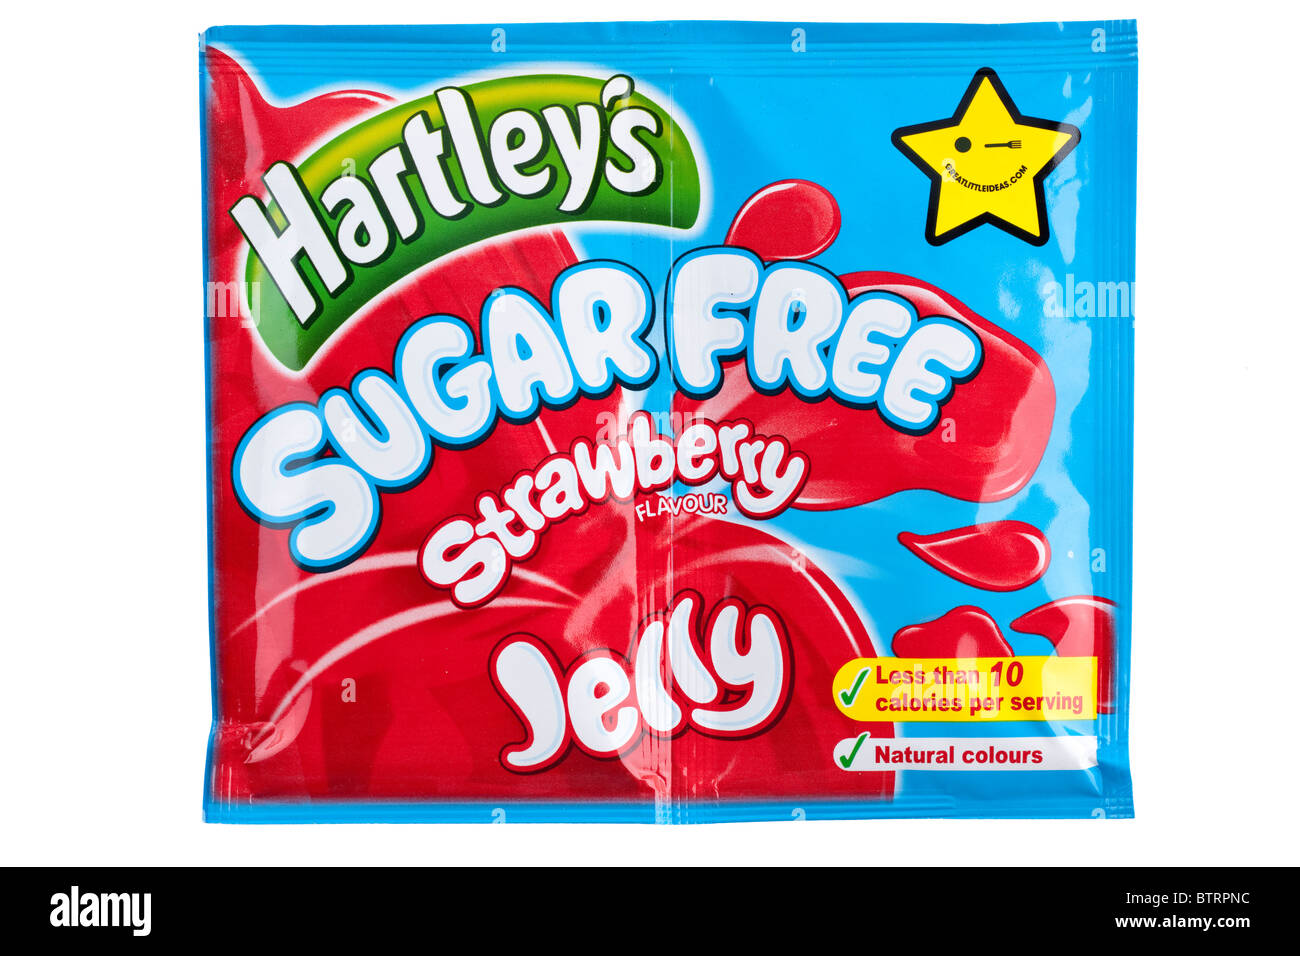 Two sachets of Hartley's sugar free strawberry flavoured jelly Stock Photo